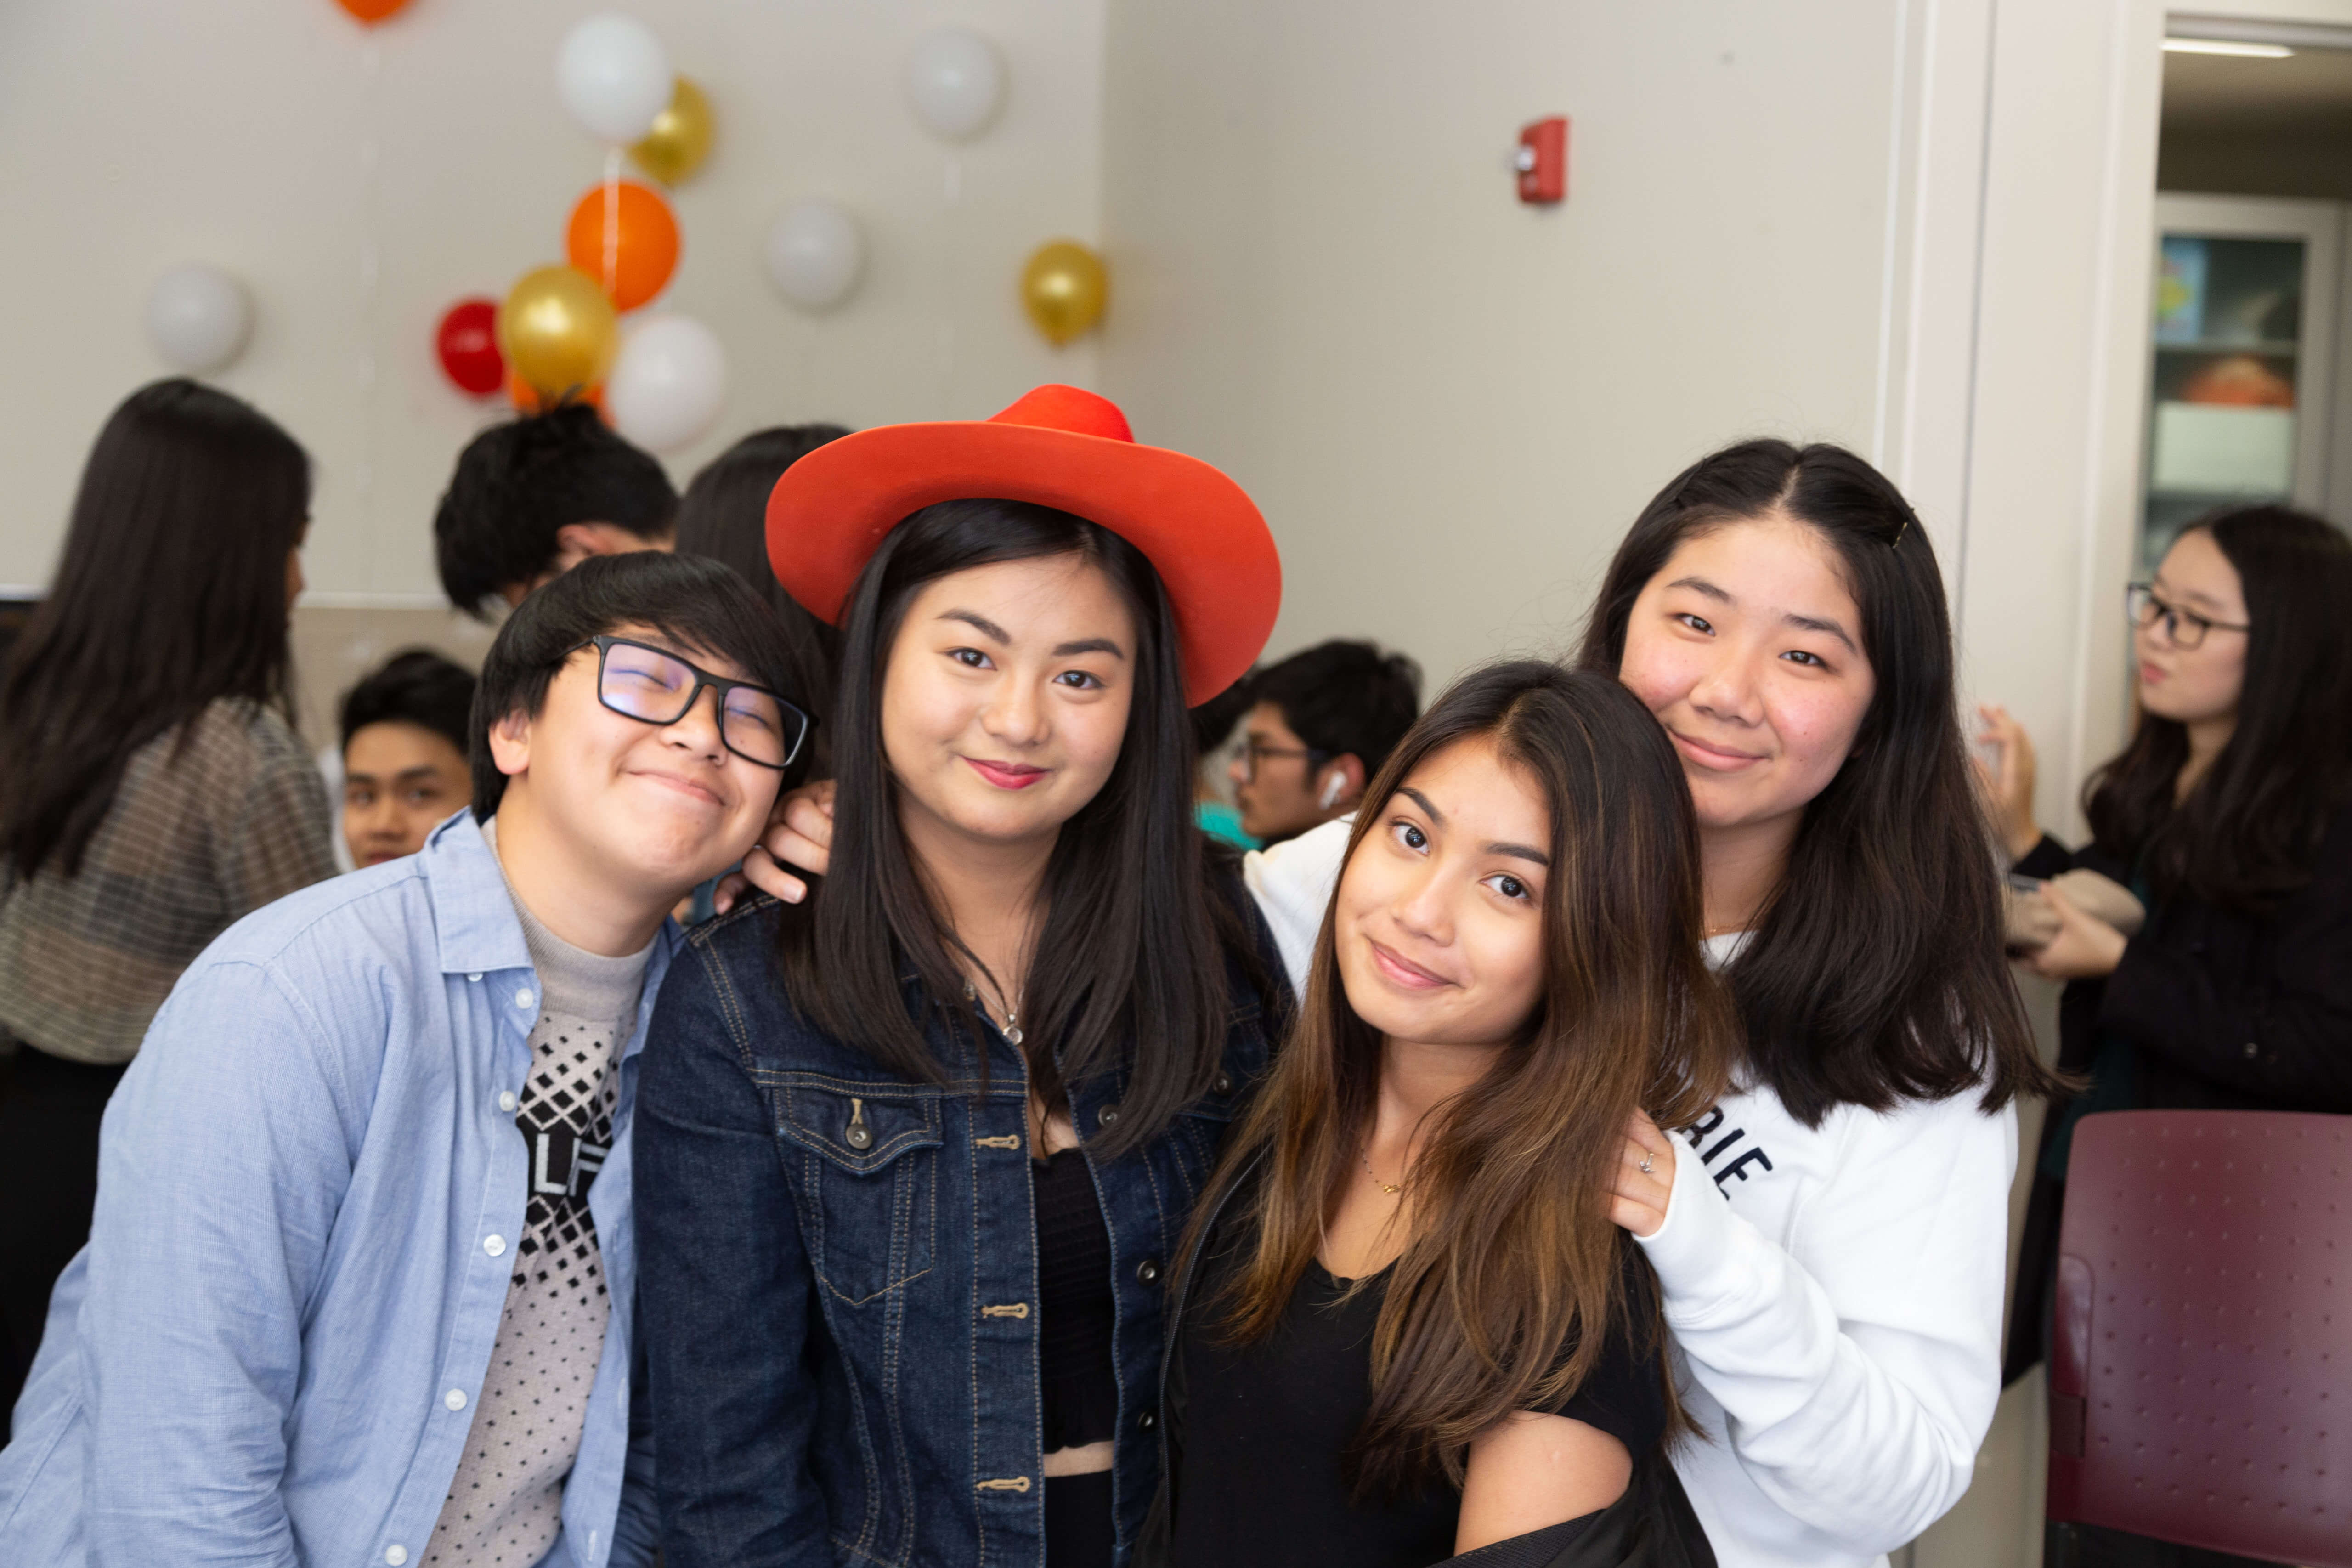 4 students at a party pose for a picture